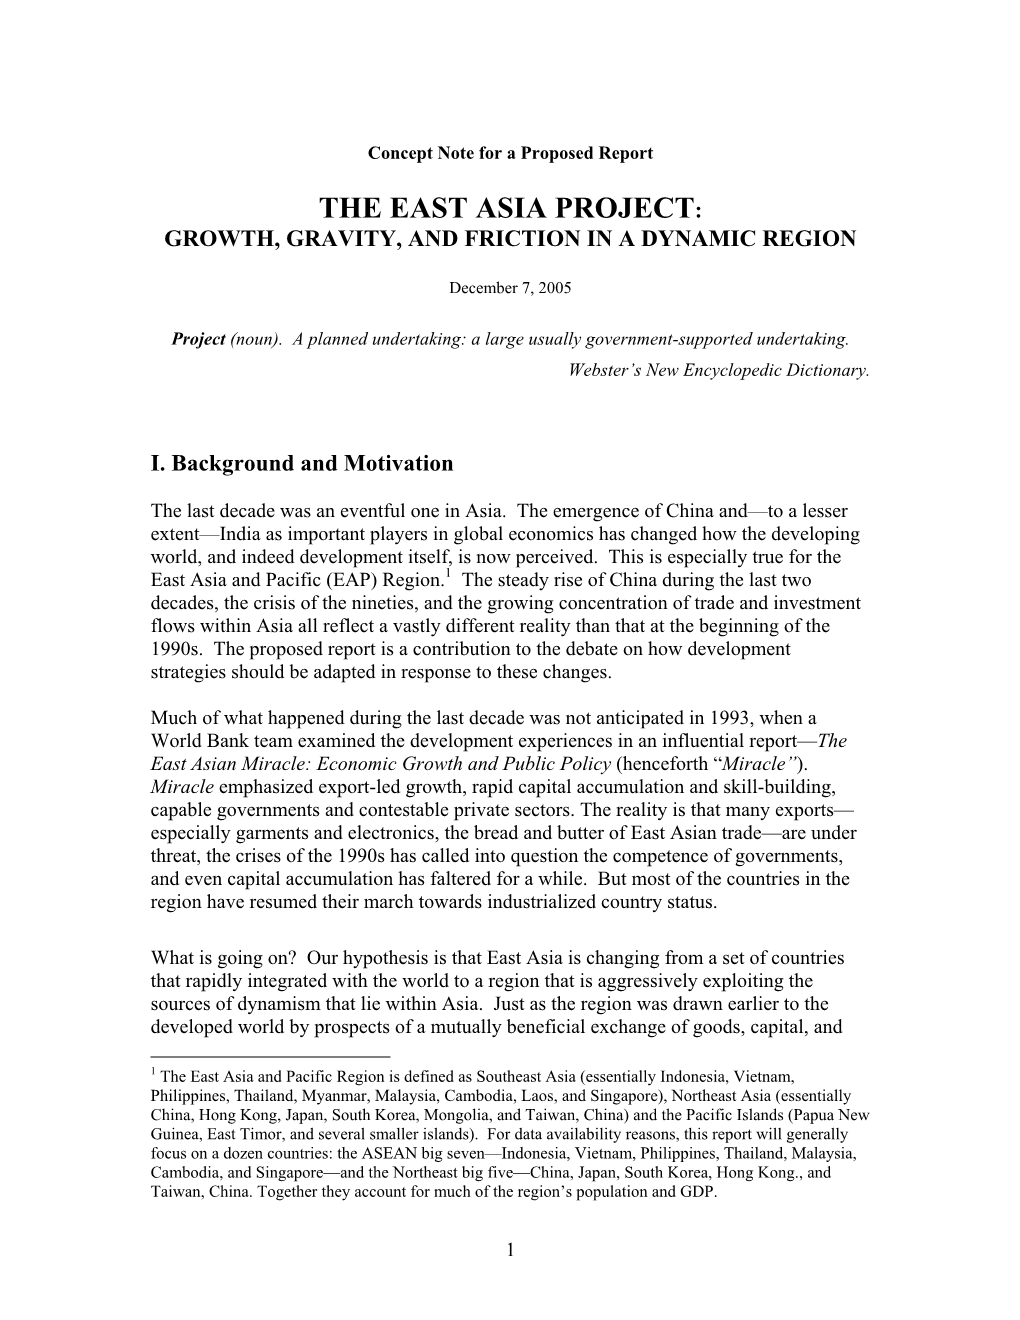 The East Asia Project: Growth, Gravity, and Friction in a Dynamic Region